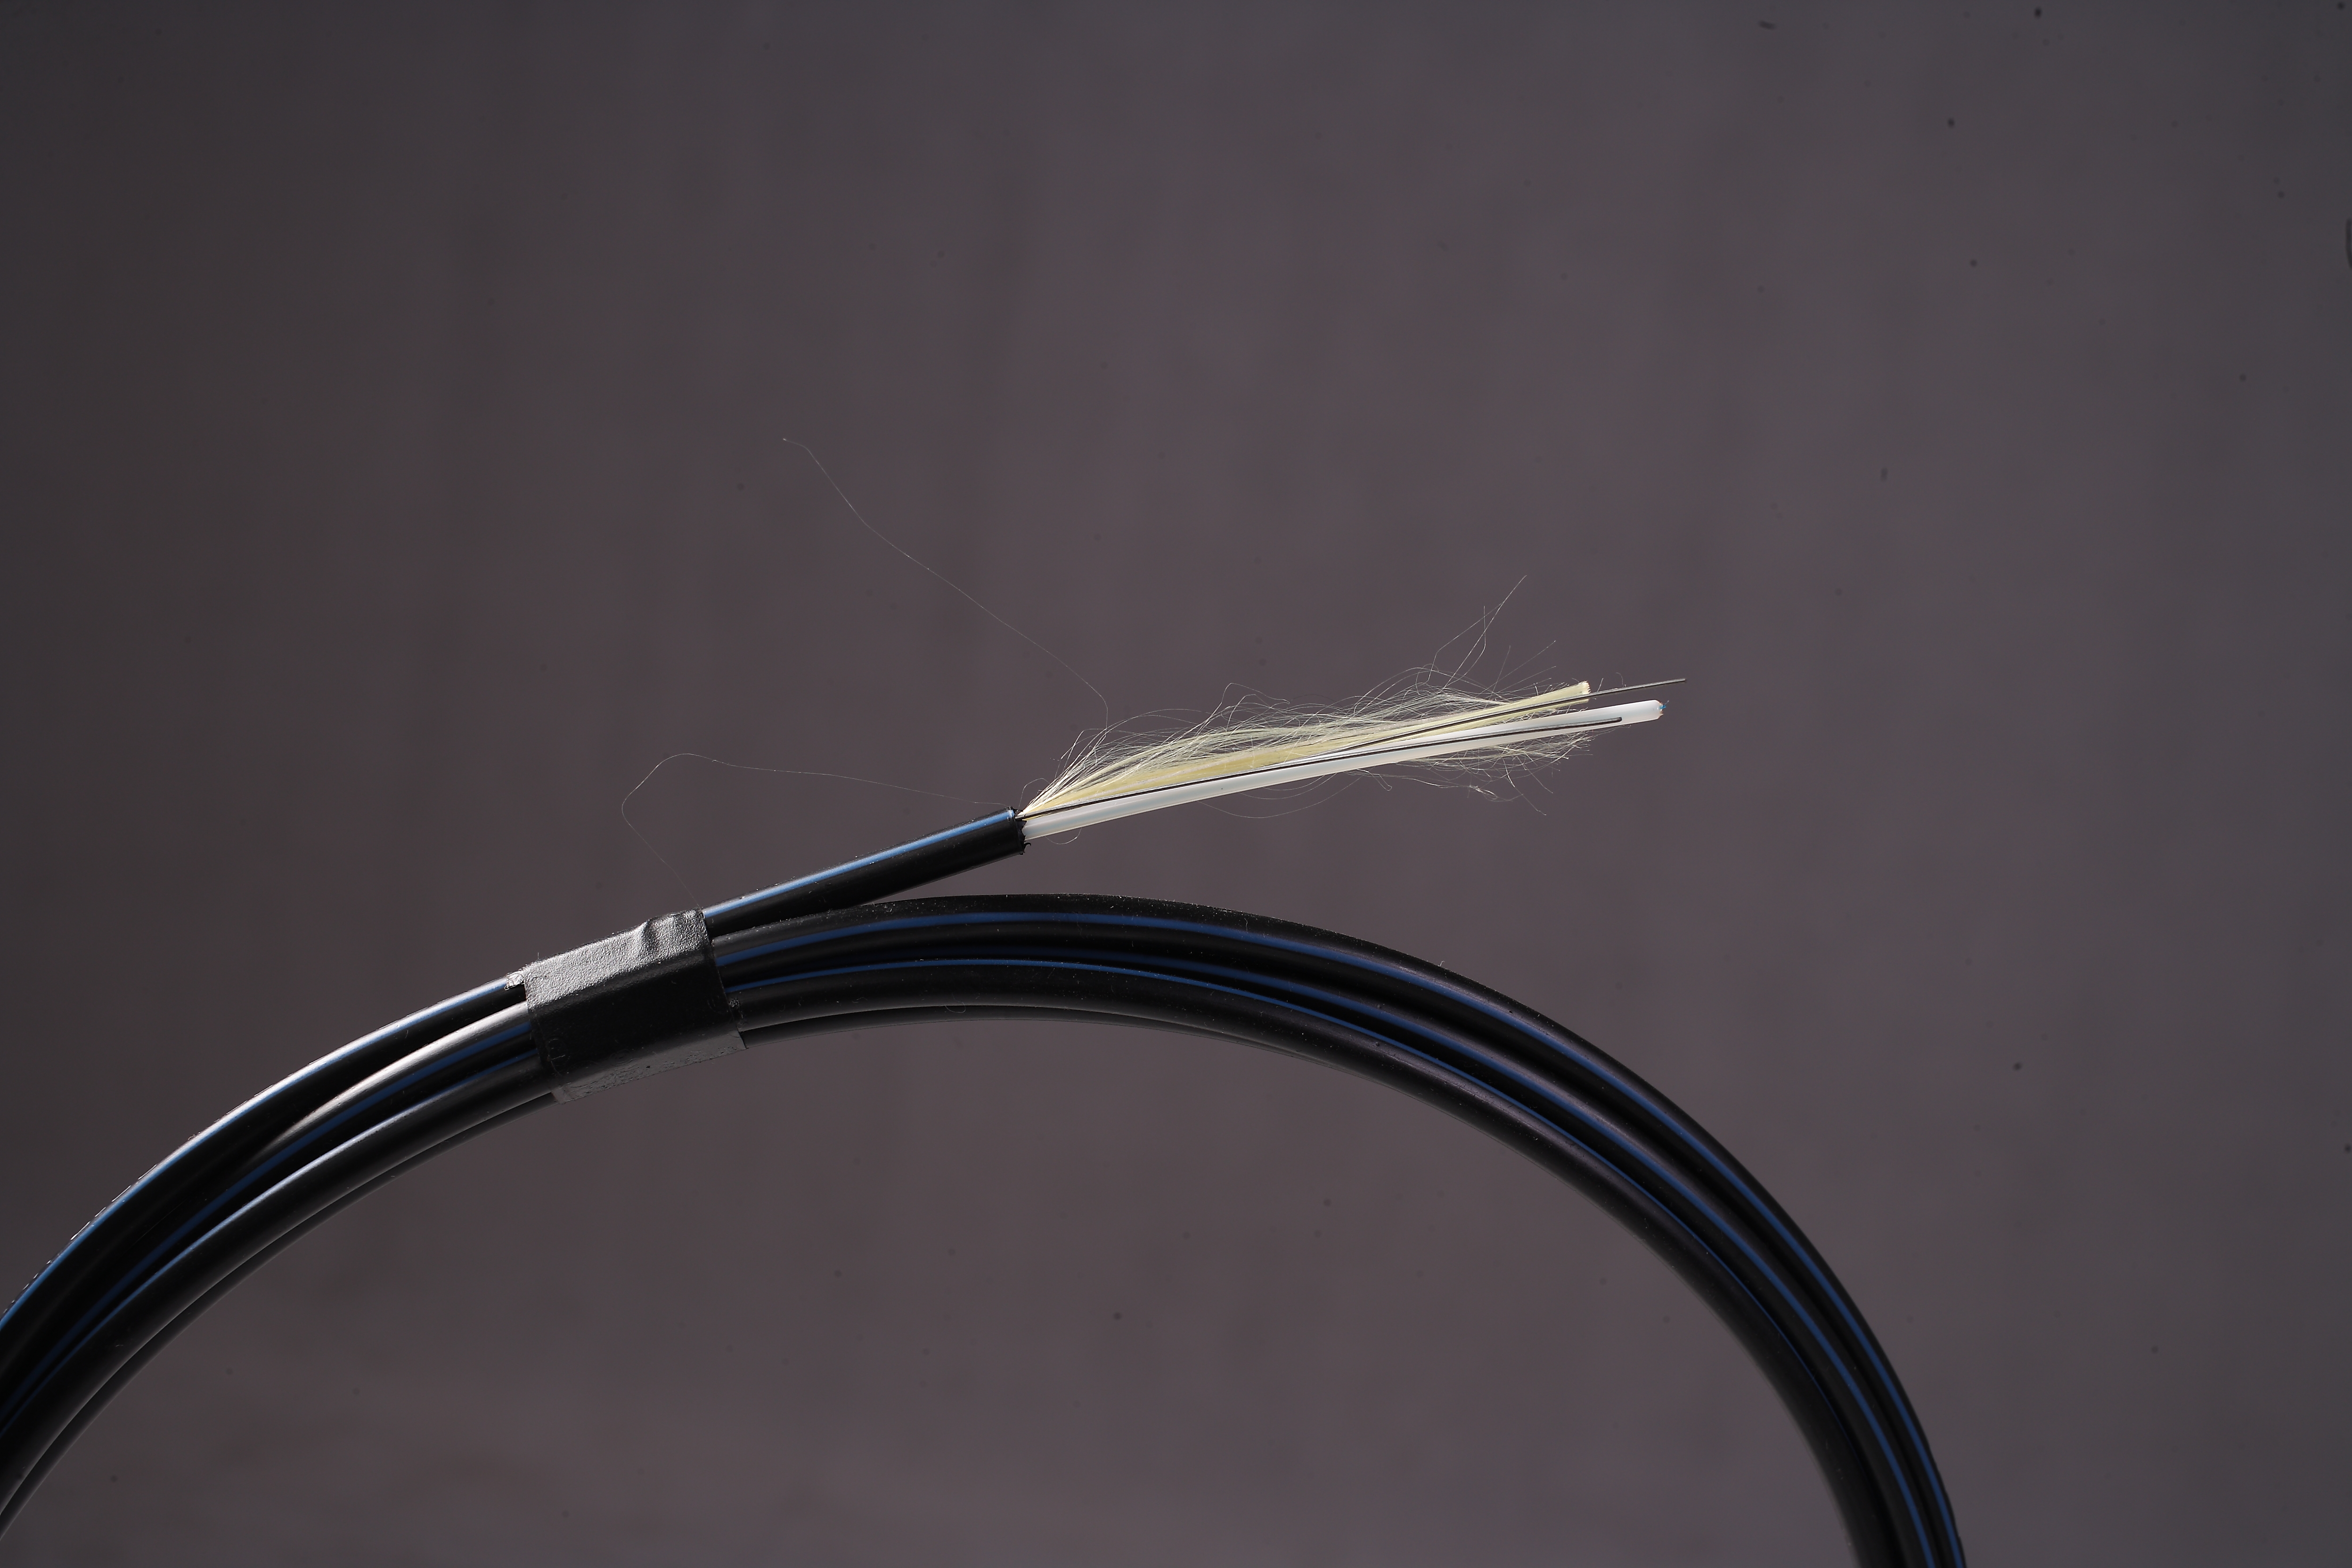 Ducted access cable (DAC)